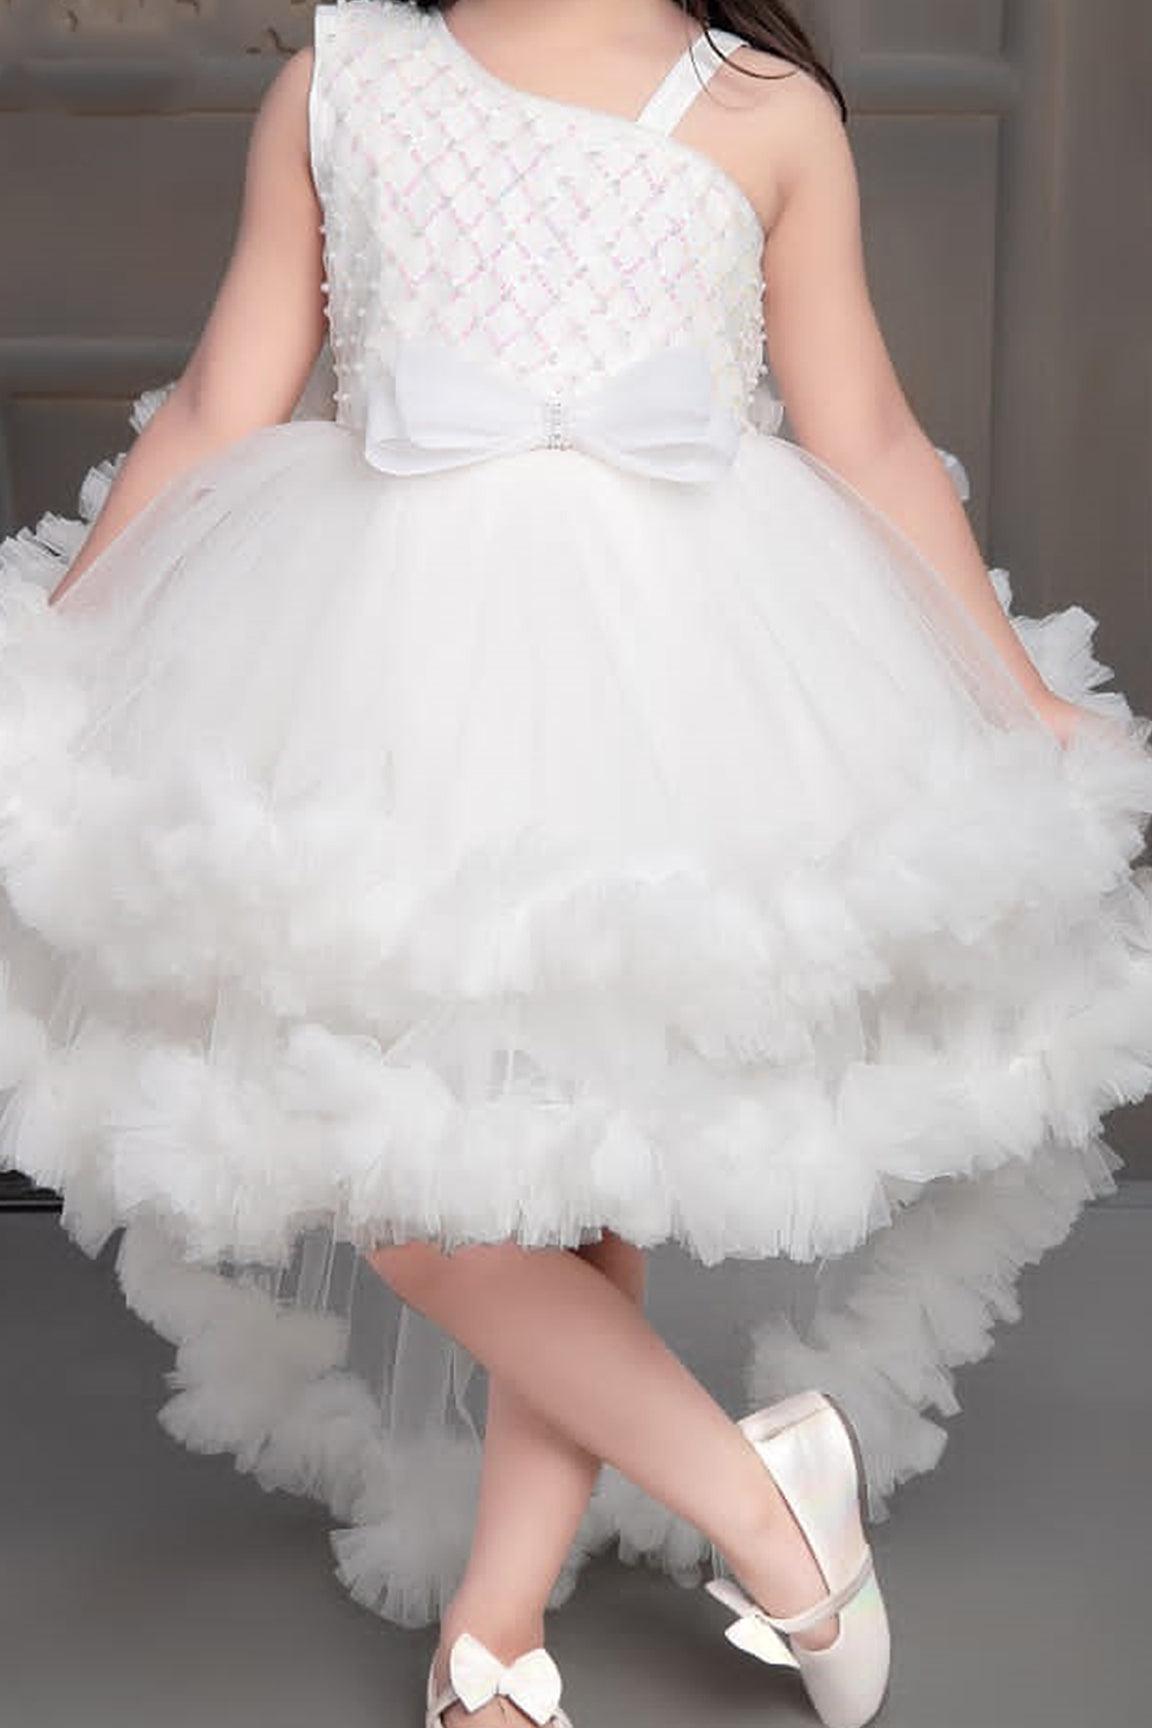 White Tailback Frock With Bow For Girls - Lagorii Kids